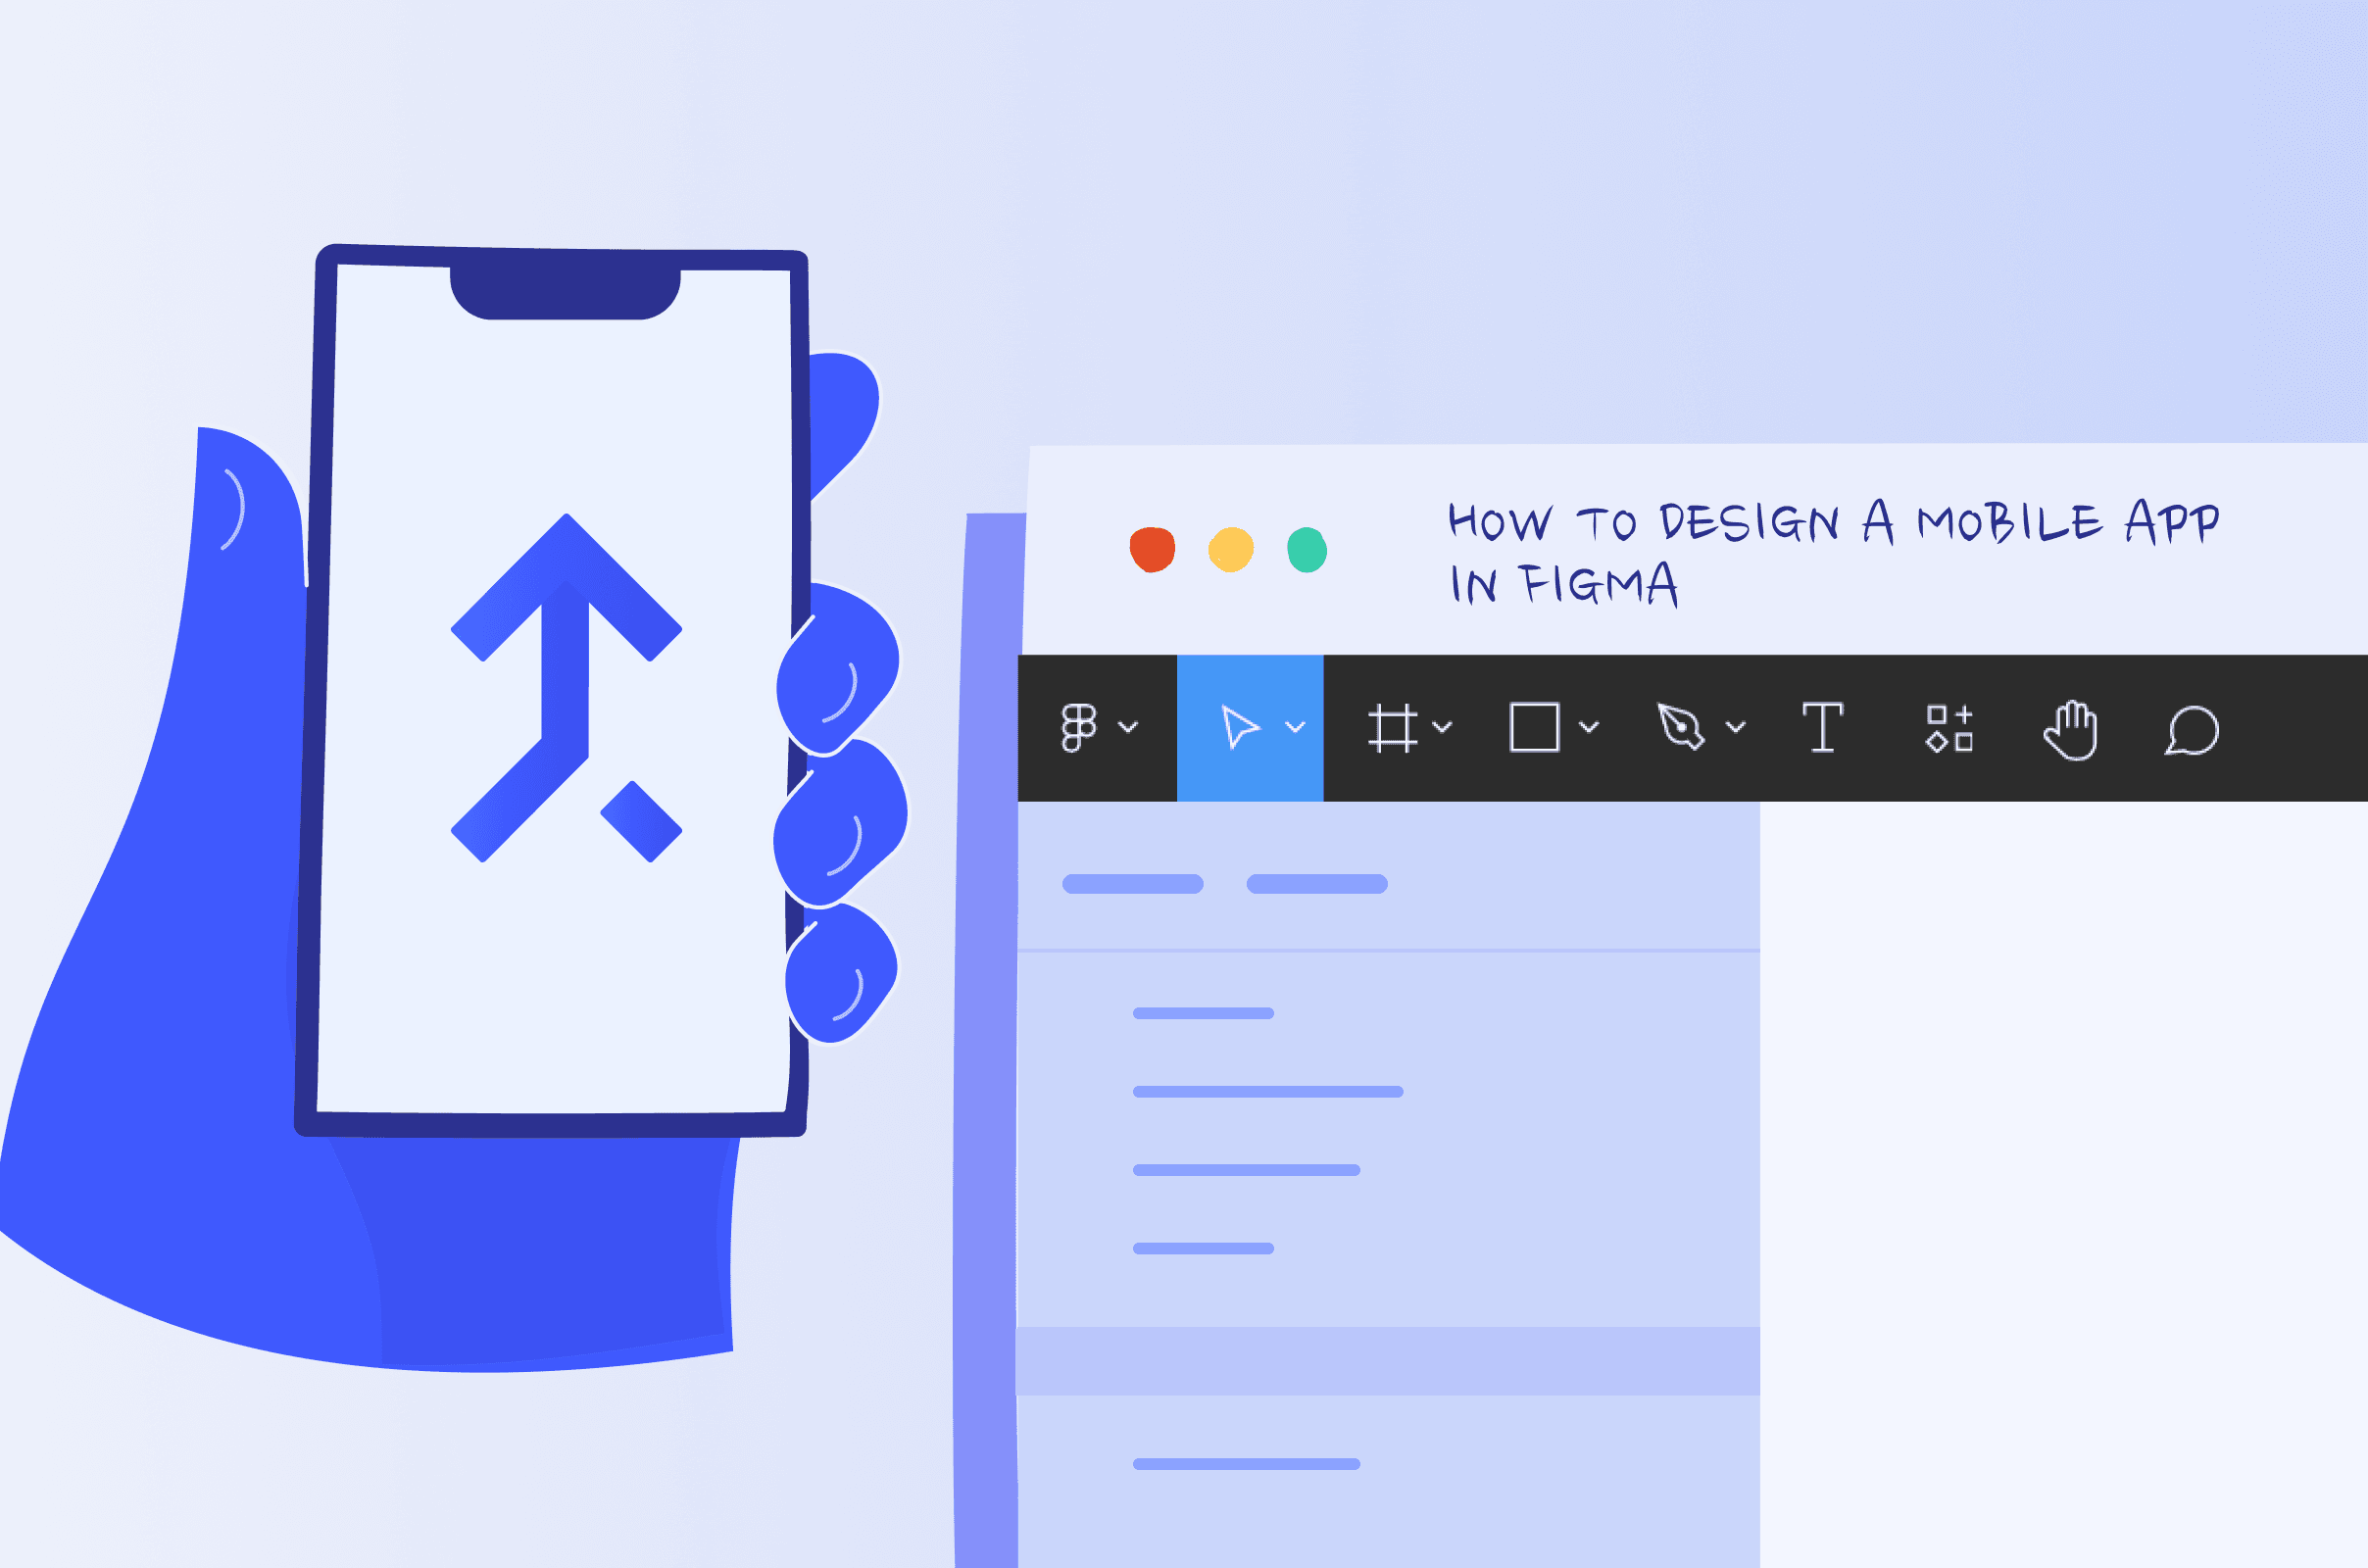 How to design a mobile app in Figma - a short guide for those just starting out